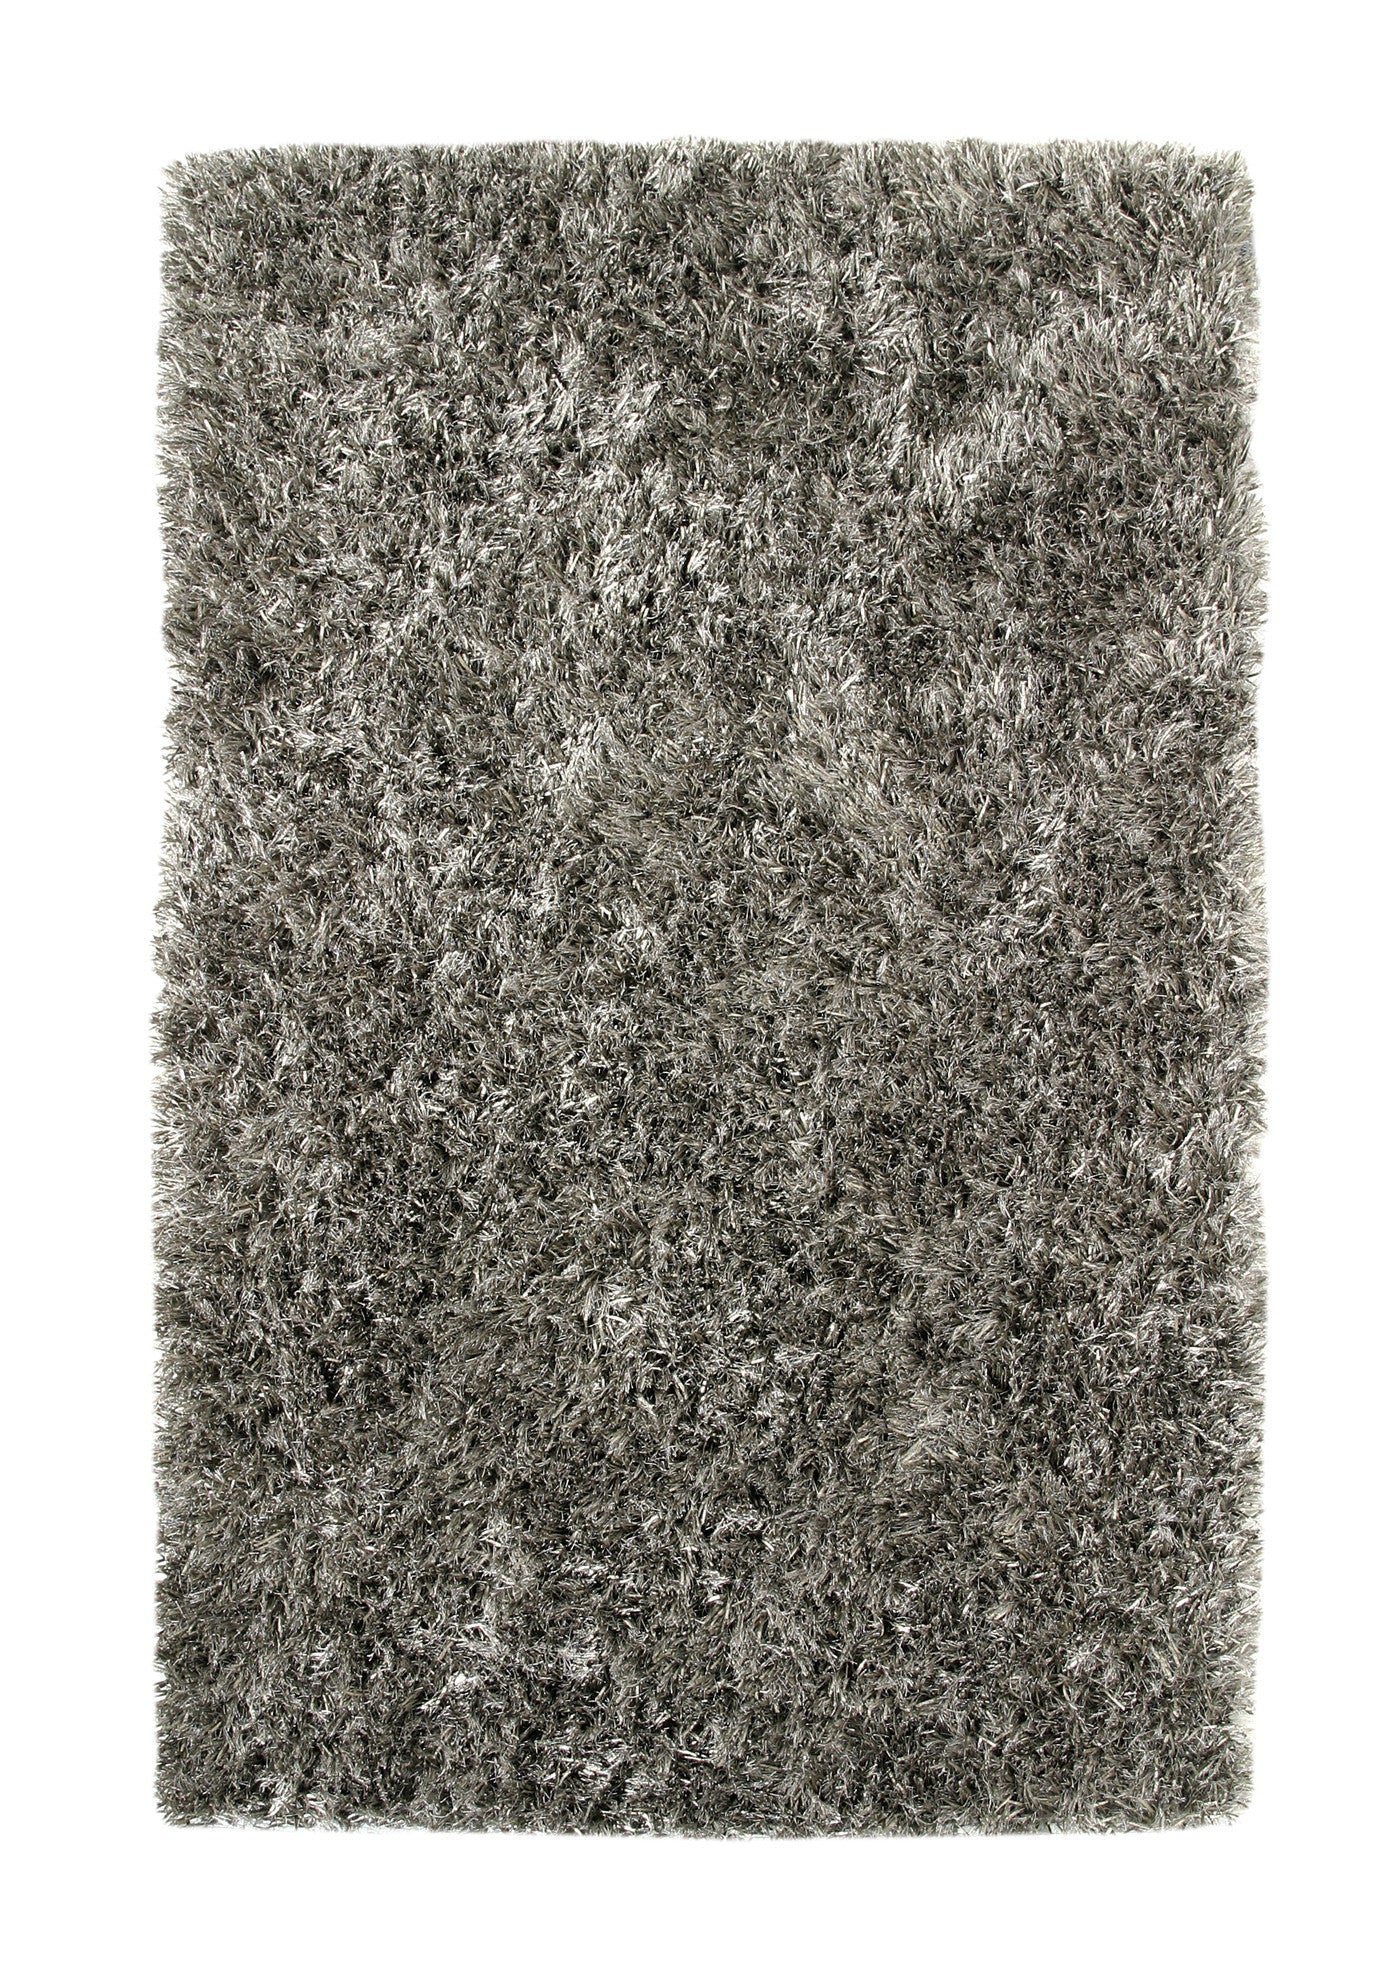 Dynamic Rugs Romance 2600 Mineral Area Rug main image